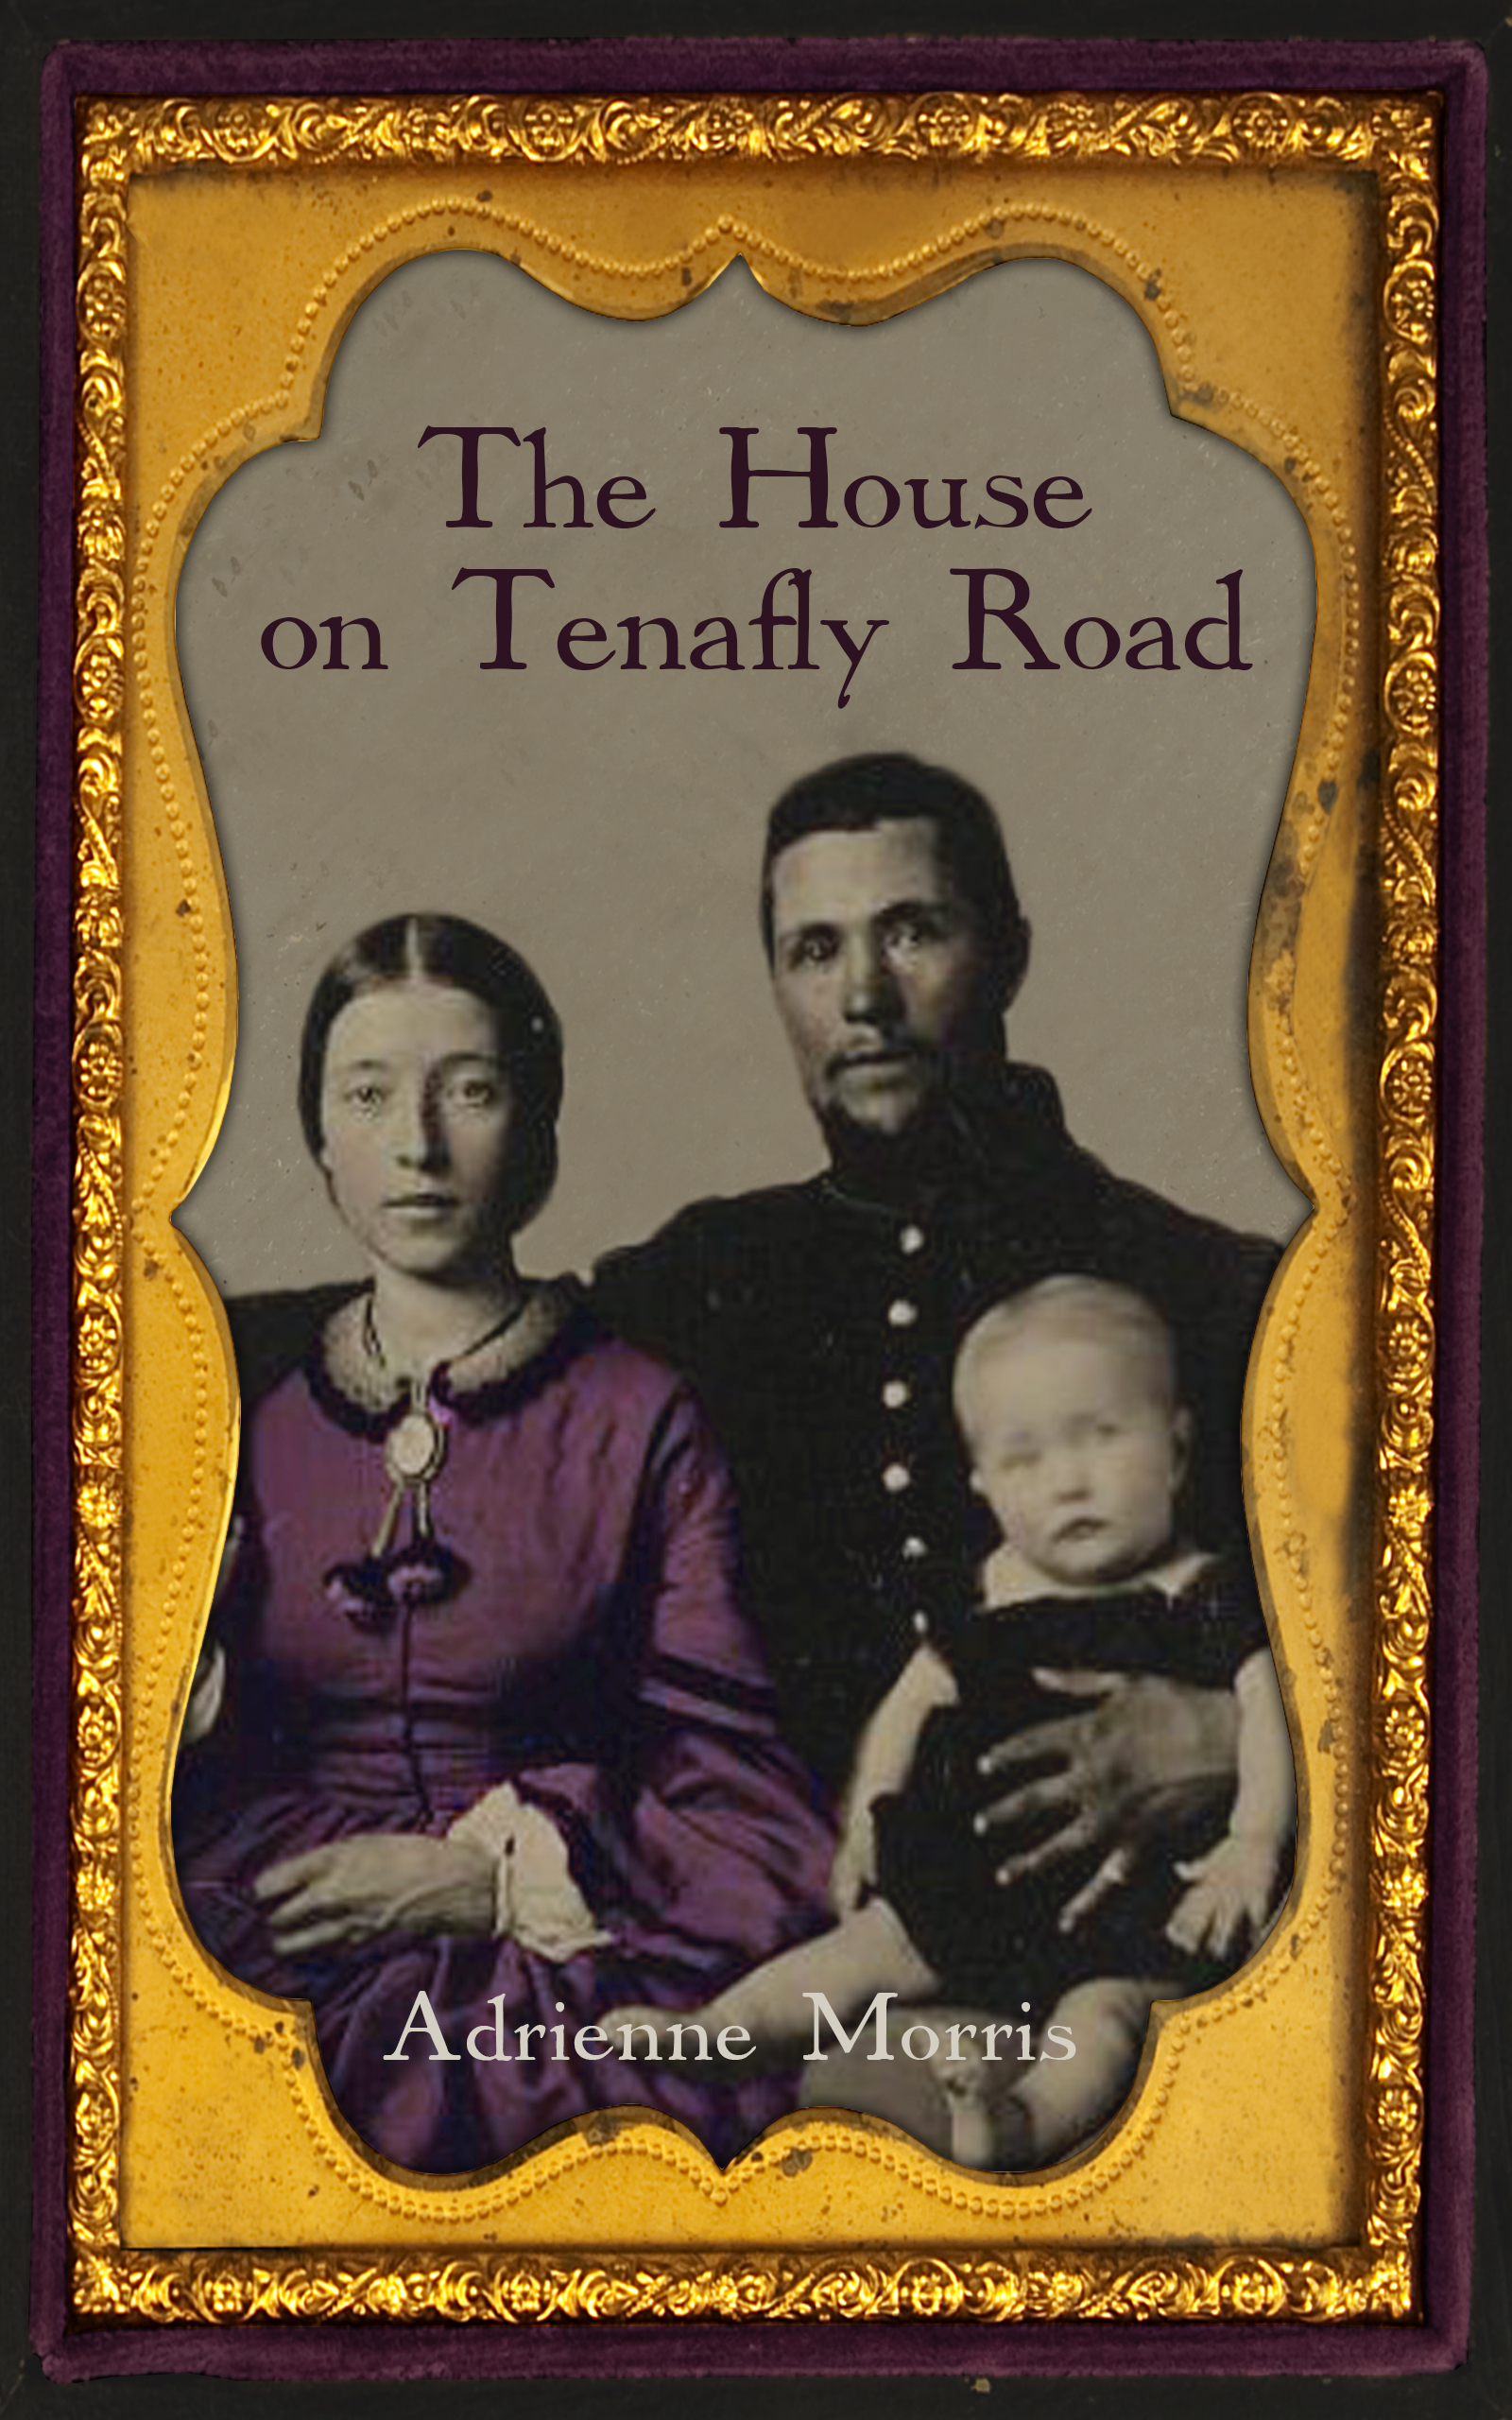 FREE: The House on Tenafly Road by Adrienne Morris